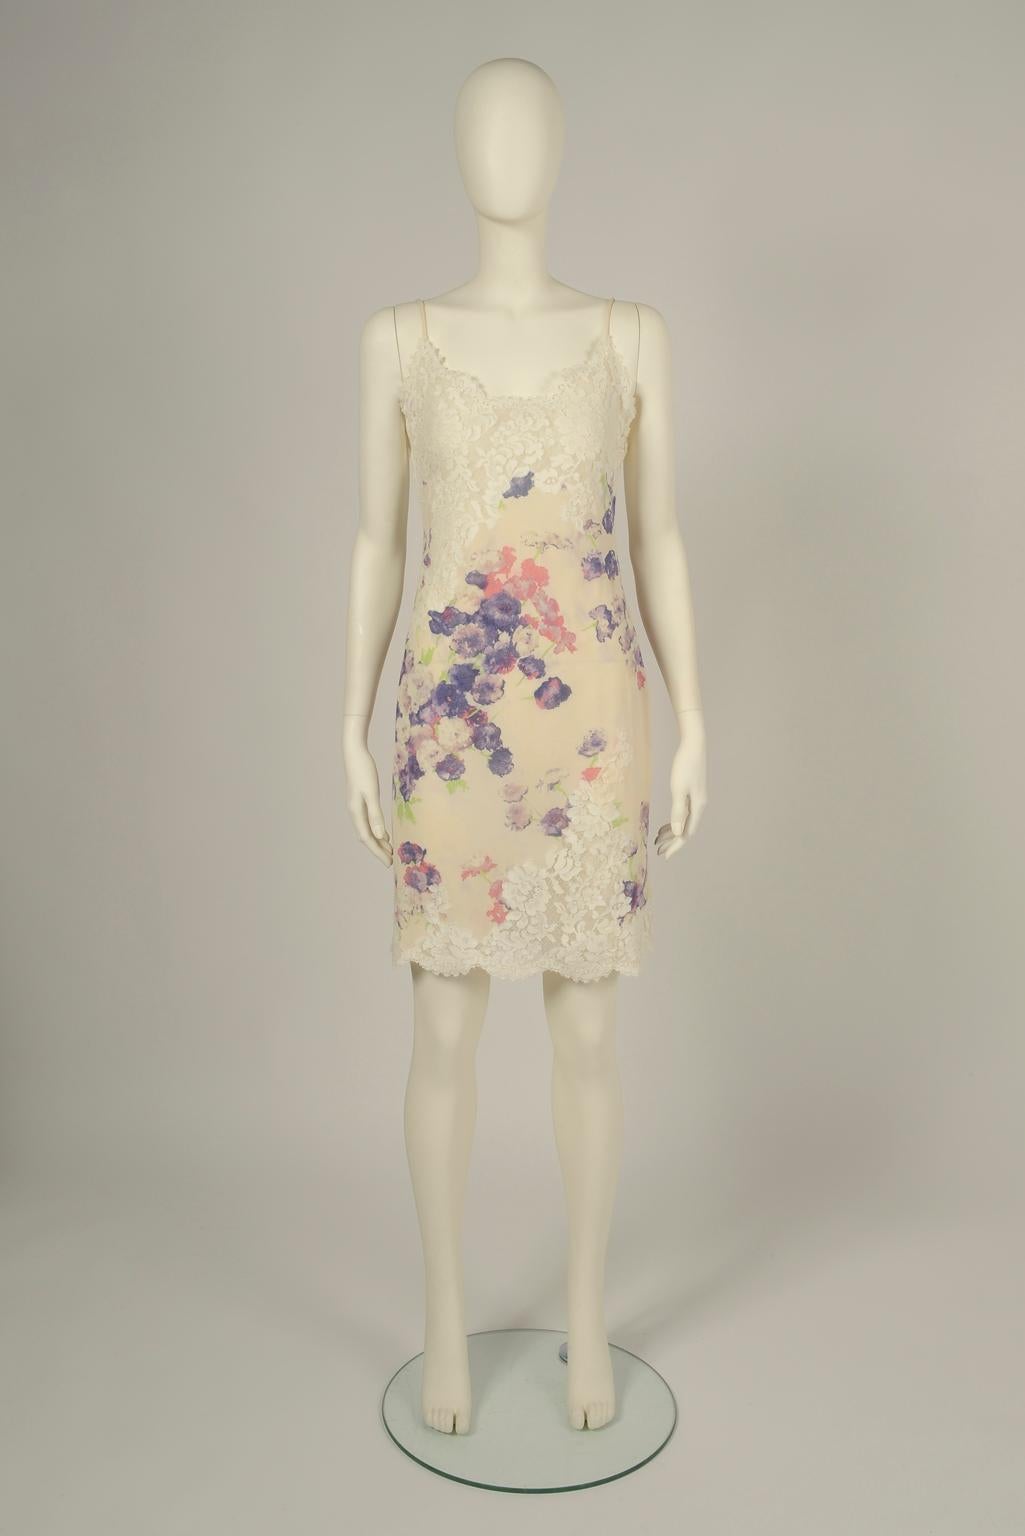 In line with the minimal slip styles of the 90s, this vintage Emanuel Ungaro (first line) mini dress is perfect for nearly any summer events. Made from refined silk patterned with blooms in a palette of pretty pastel tones, the slip dress is